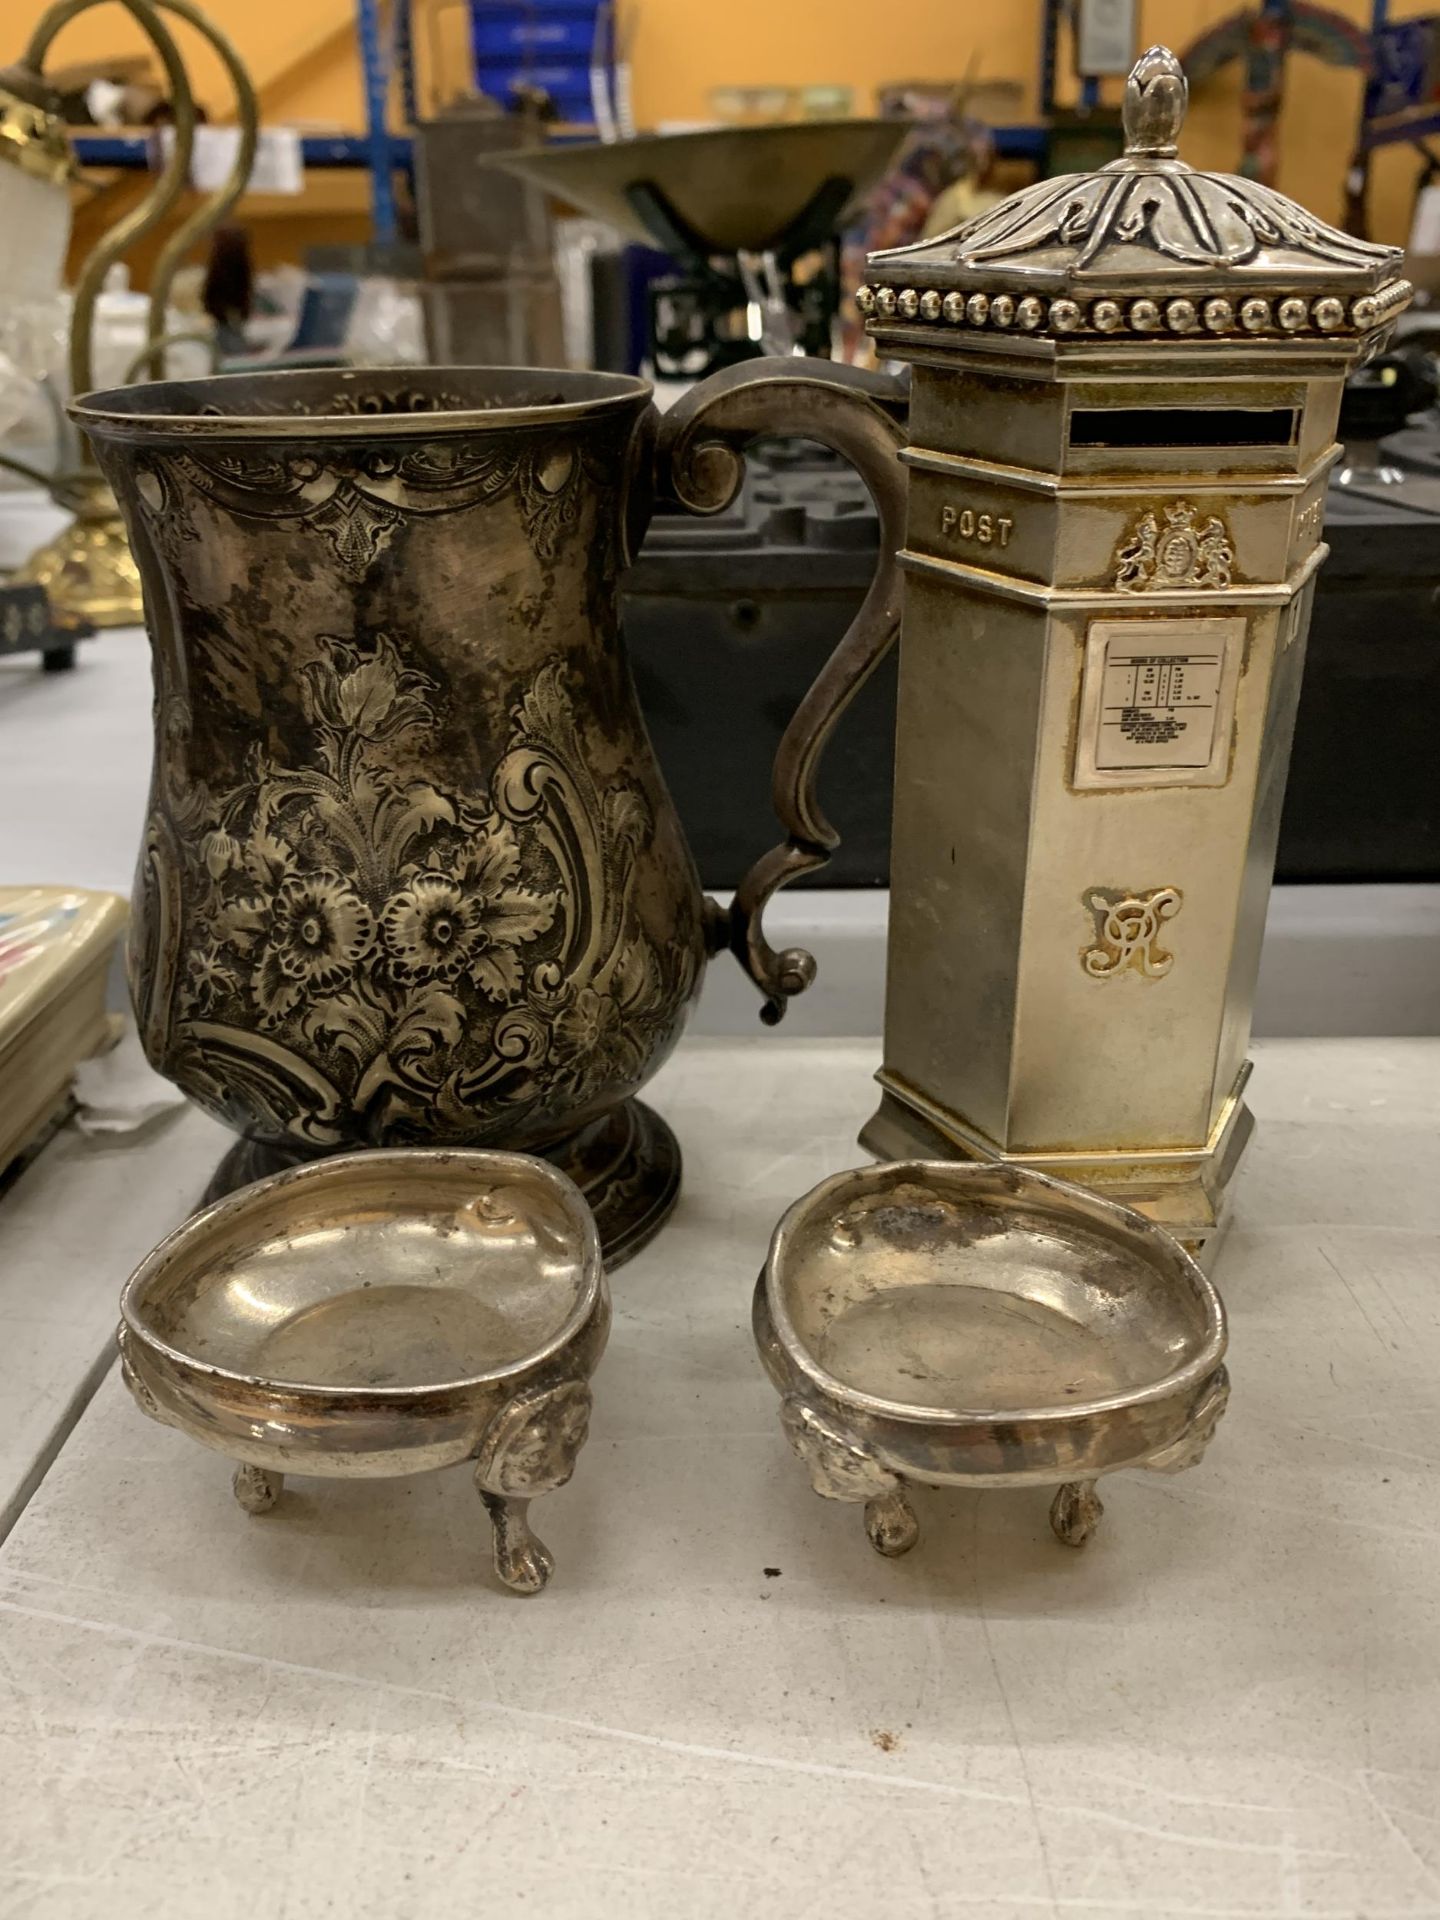 A SILVER PLATED ORNATELY DECORATED TANKARD, TWO SILVER PLATED OPEN SALTS AND A WHITE METAL POST